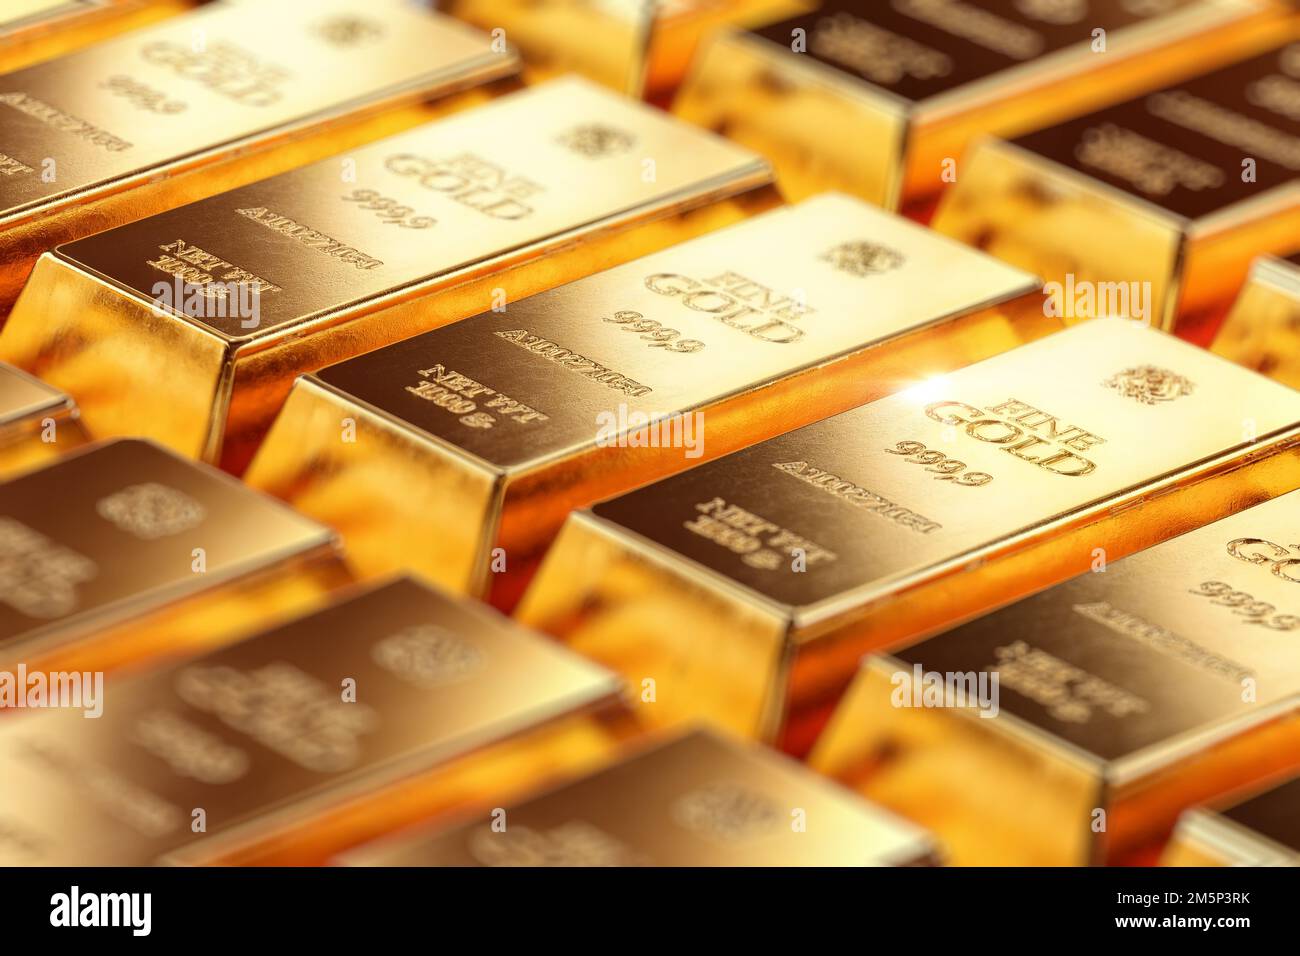 Stack of pure gold bullion bars in bank vault storage. 1kg 999,9 Fine Gold bar ingots background. Precious metal investment, finance banking business Stock Photo